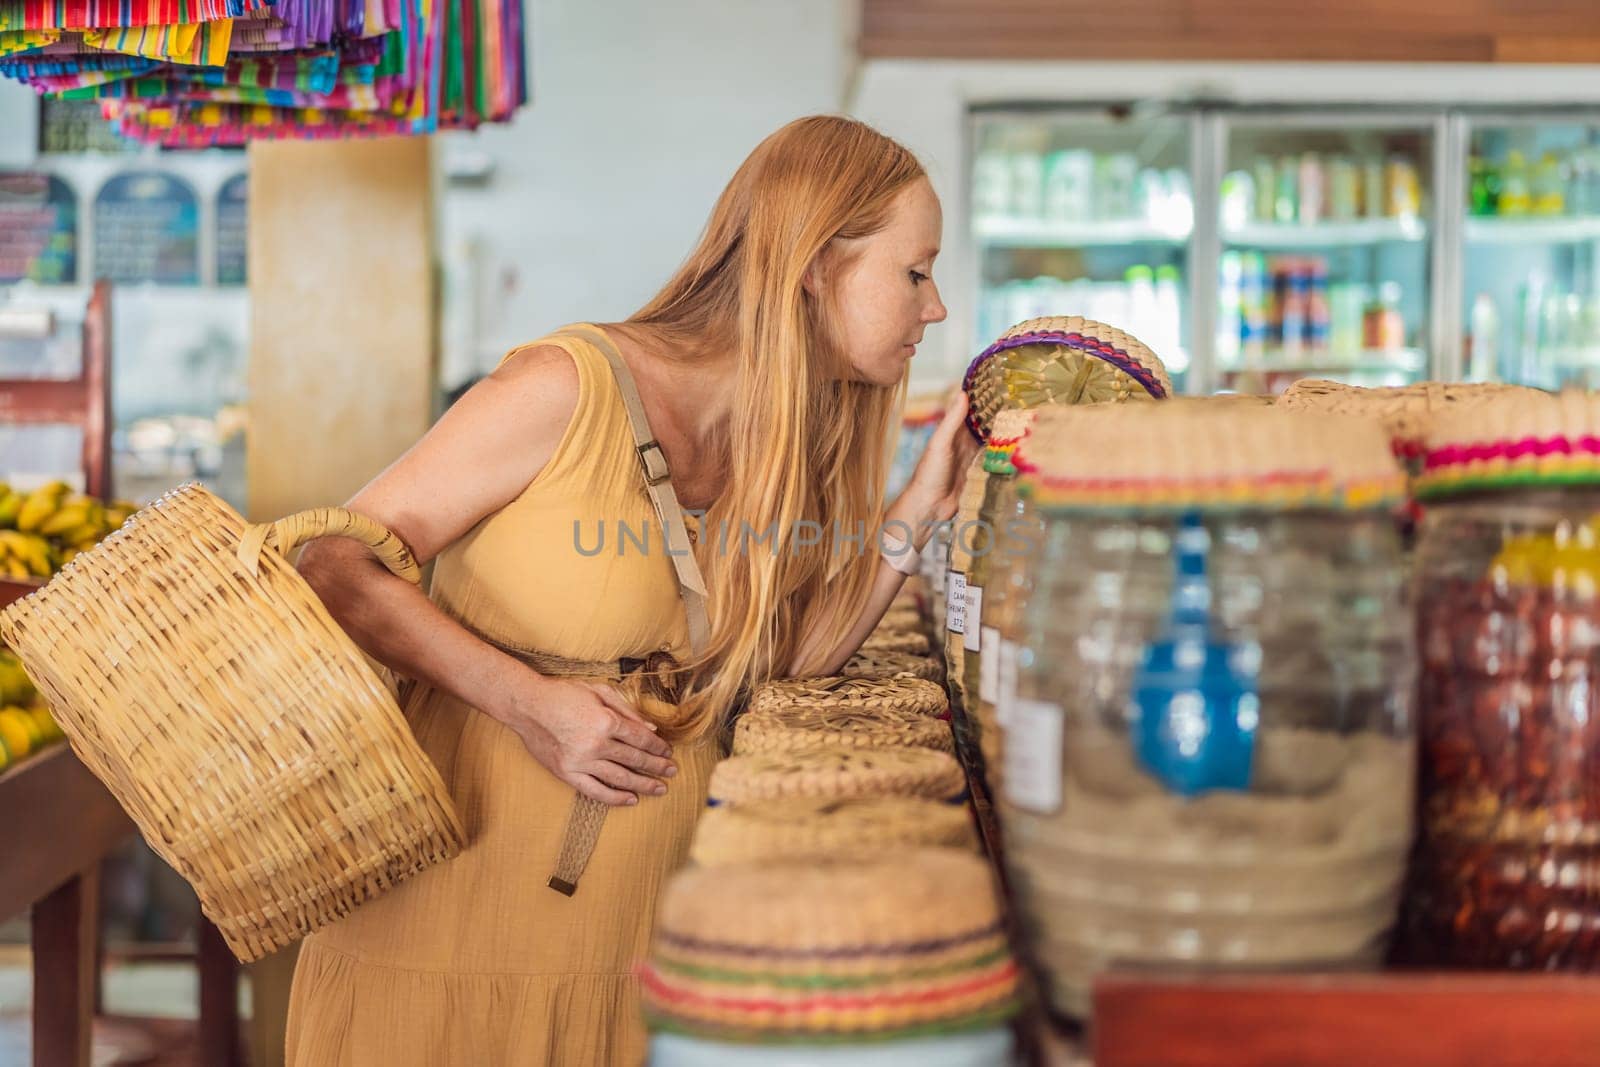 In a grocery store, a pregnant woman stands by a fruit stand, surrounded by various natural foods. She is in a public space where the local market offers whole foods for trade Pregnant woman buying organic vegetables and fruits at Mexican style farmers market